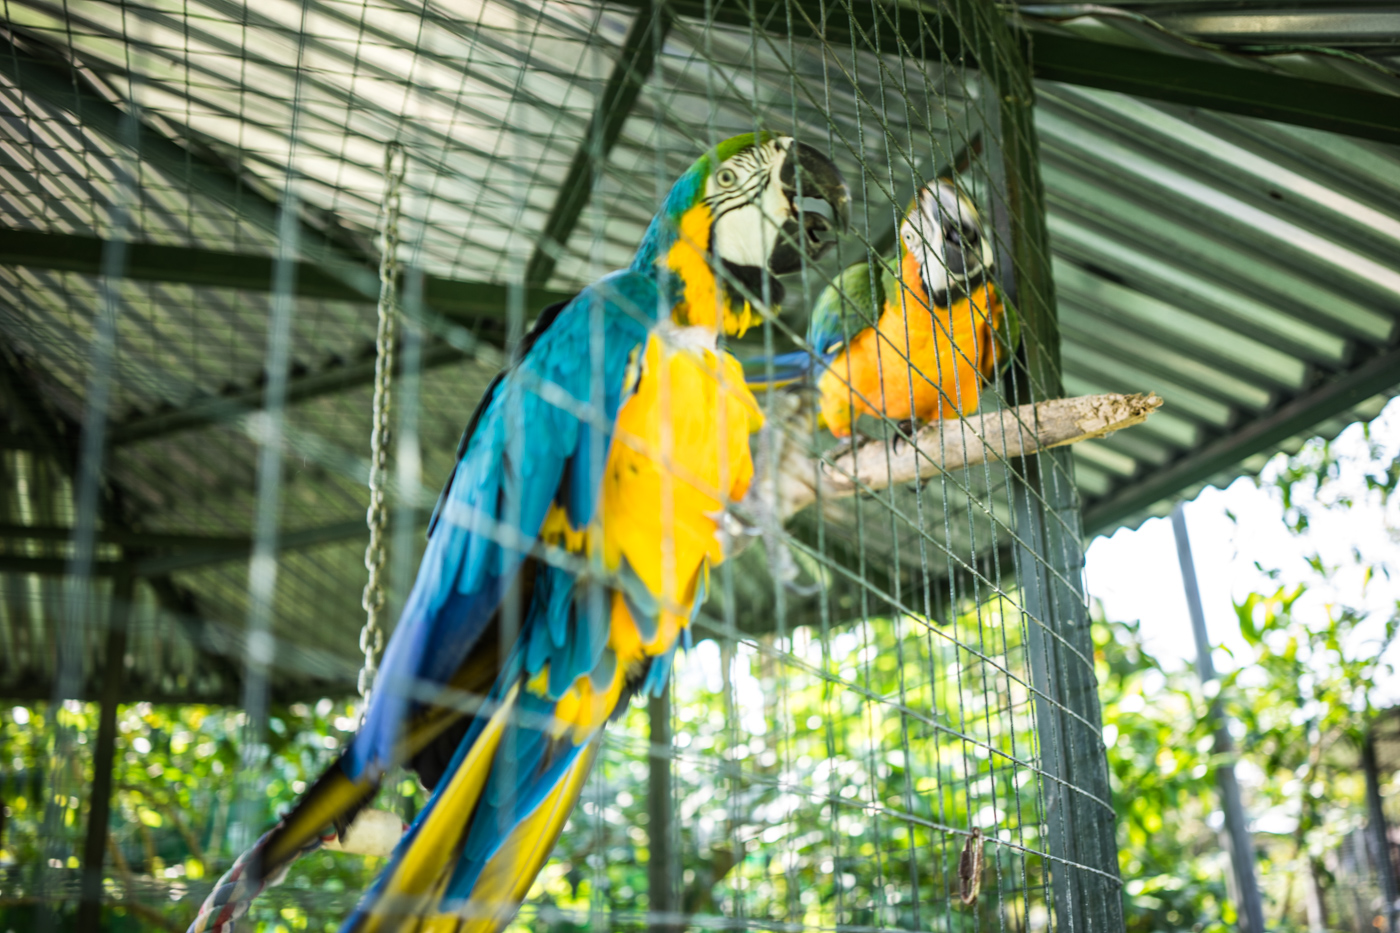 more colorful birds at the Toucan Rescue Ranch